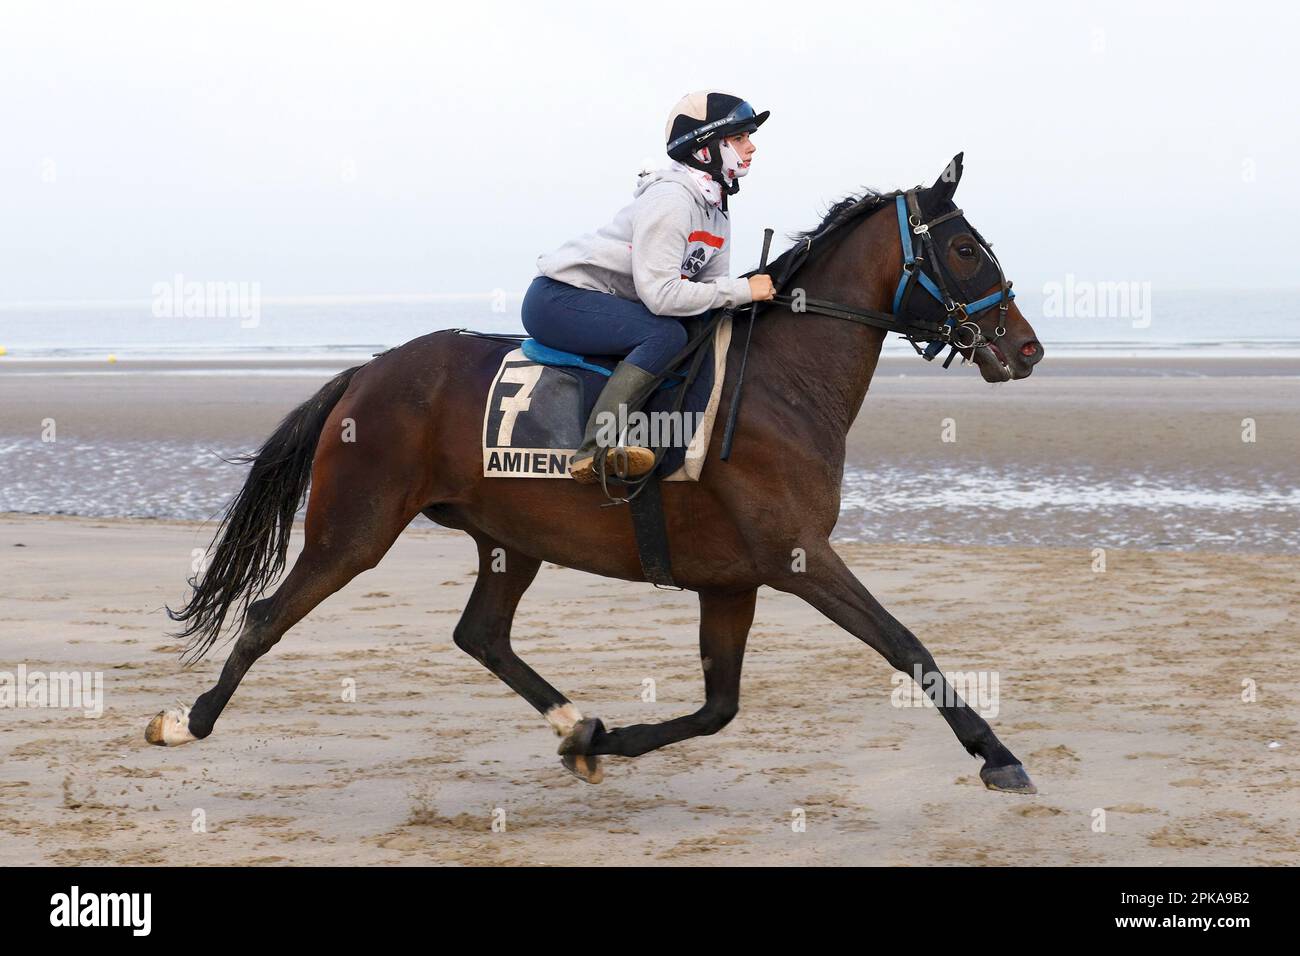 18.08.2022, France, Normandy, Deauville - Trotting horse at morning work on the beach. 00S220818D500CAROEX.JPG [MODEL RELEASE: NO, PROPERTY RELEASE: N Stock Photo